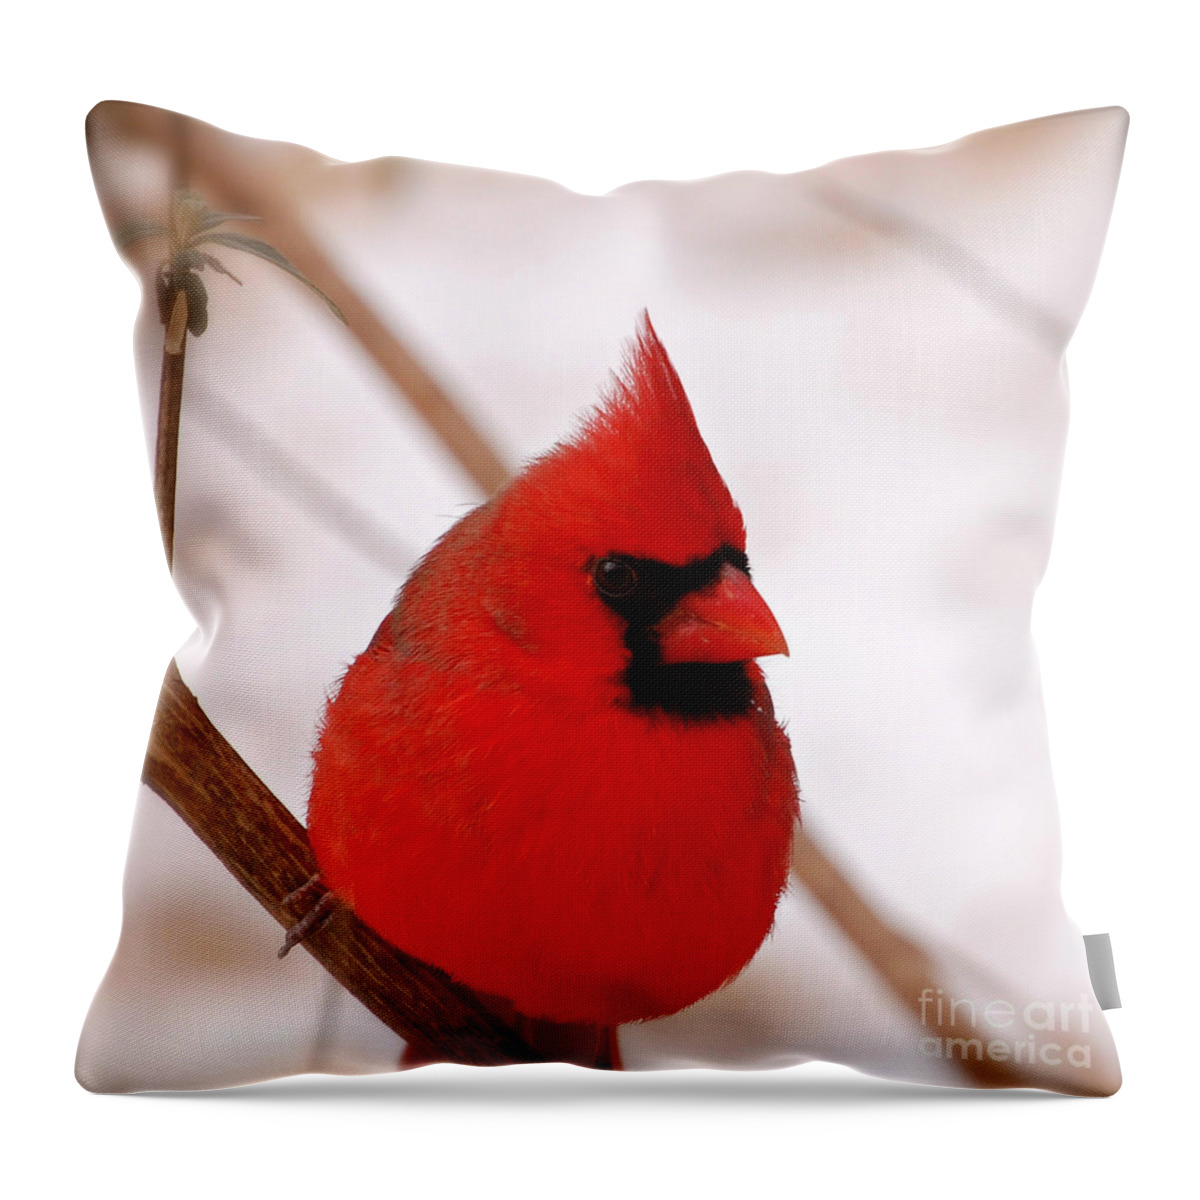 Northern Cardinal Throw Pillow featuring the photograph Big Red Cardinal Bird In Snow by Peggy Franz